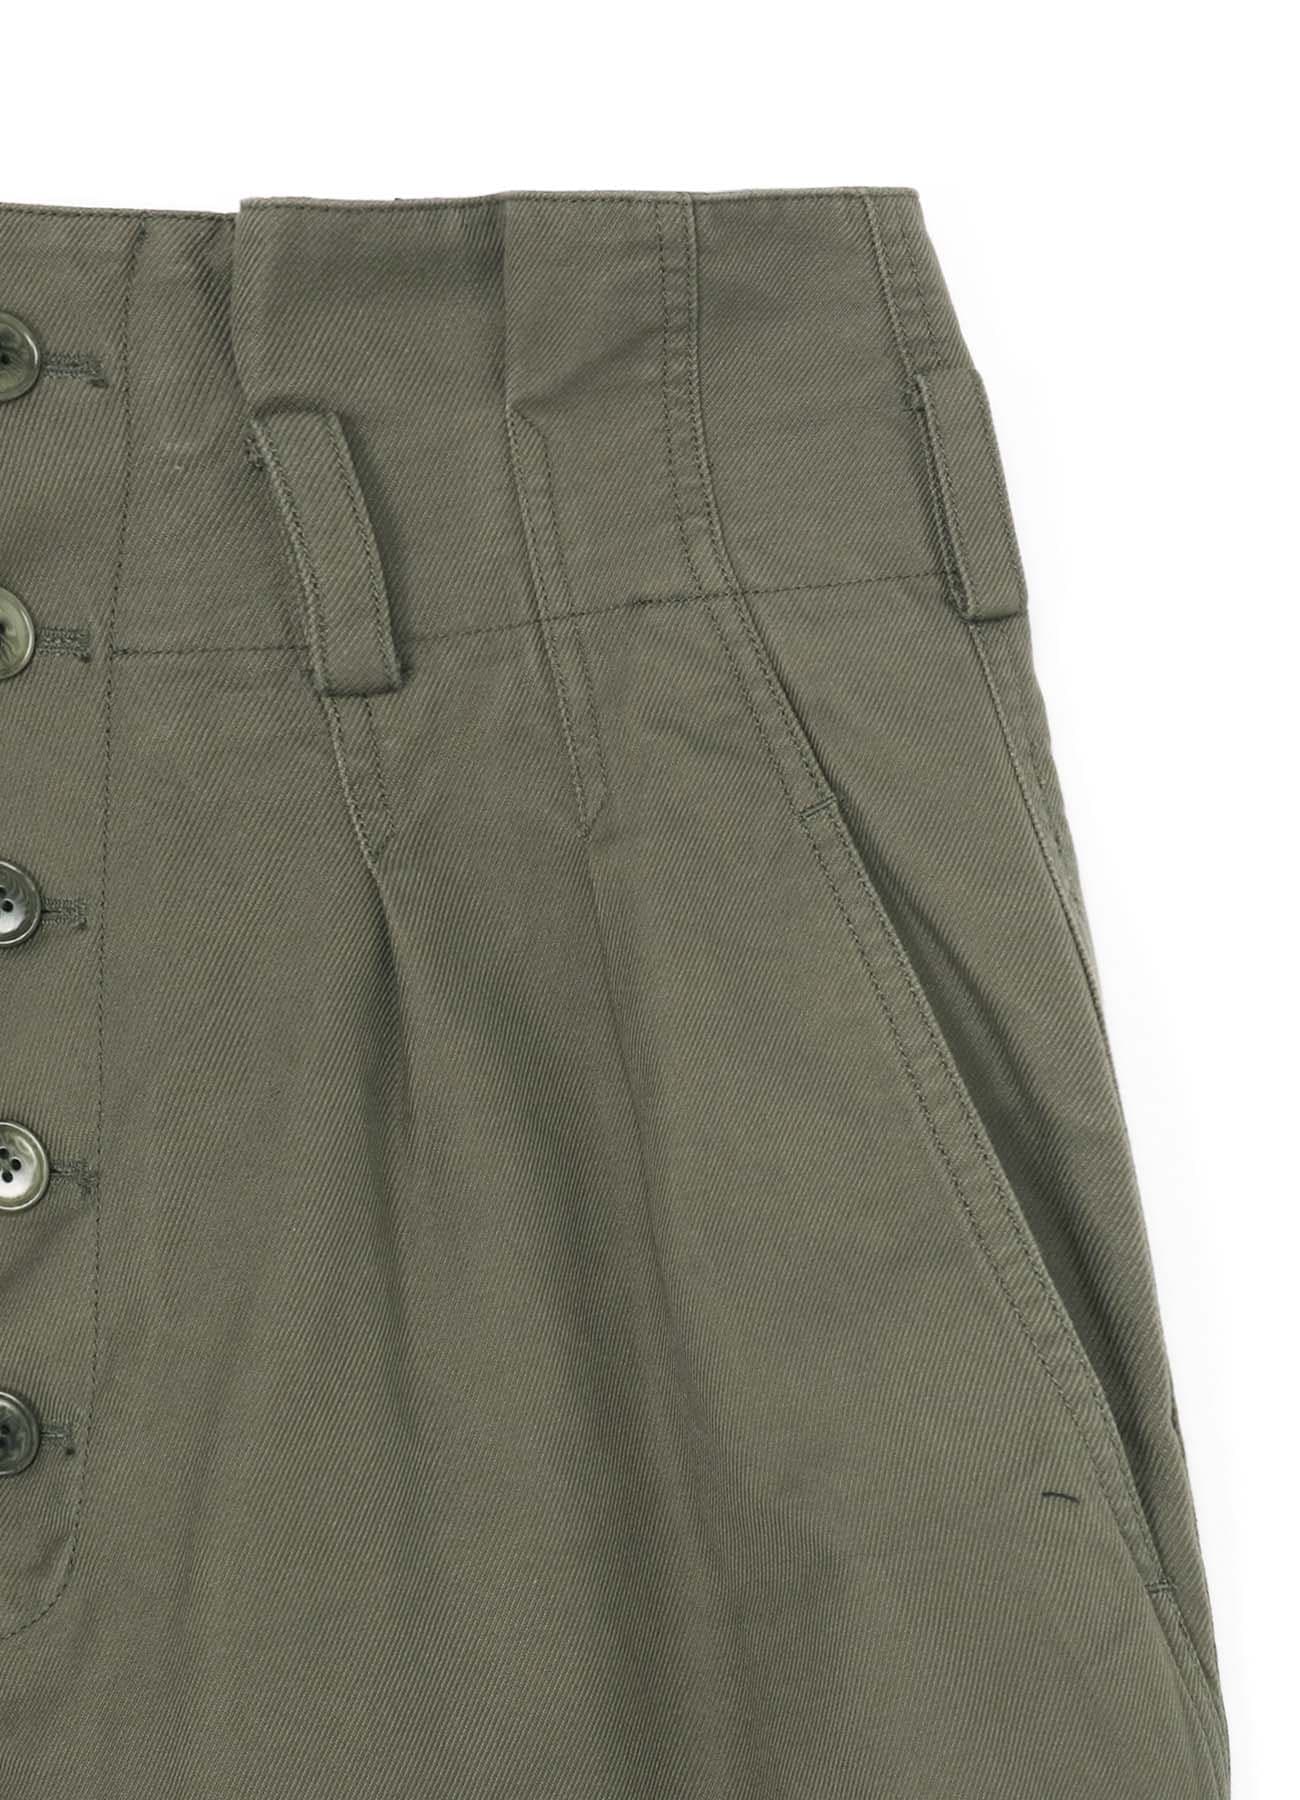 FRENCH WORKER SURGE SAROUEL PANTS WITH DEEP RISE AND BUTTON FLY DESIGN